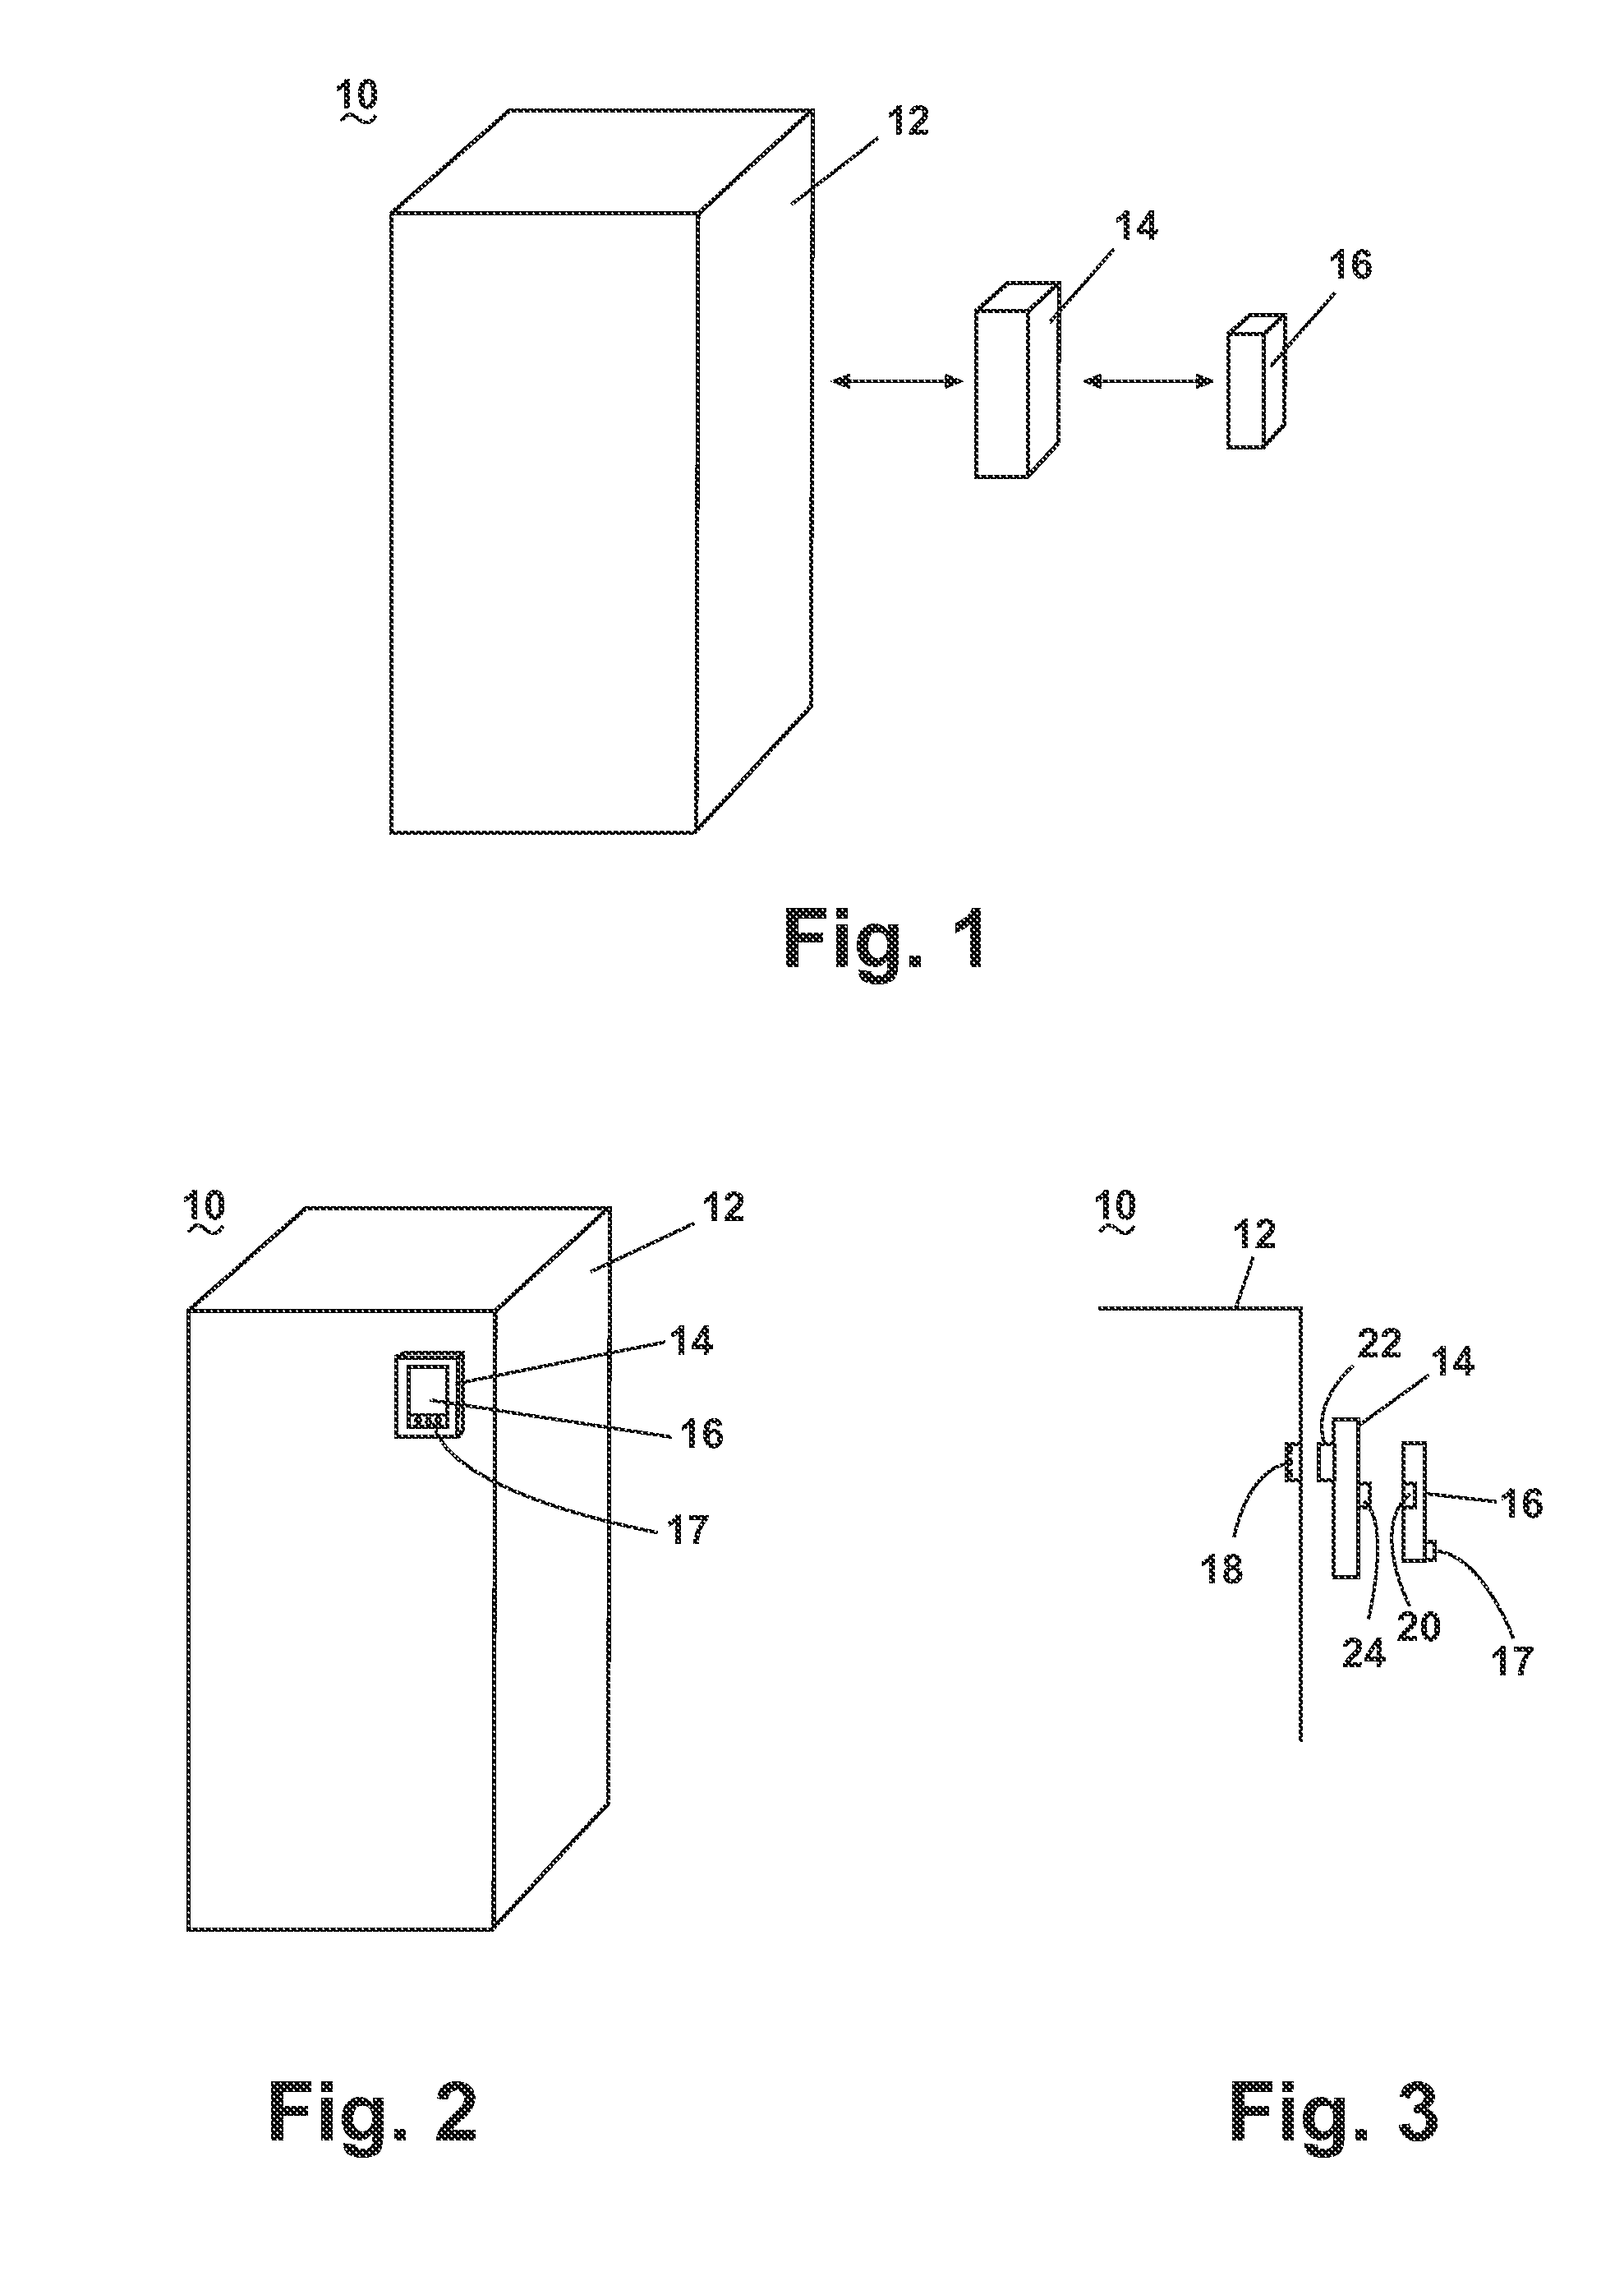 Appliance with an electrically adaptive adapter to alternatively couple multiple consumer electronic devices